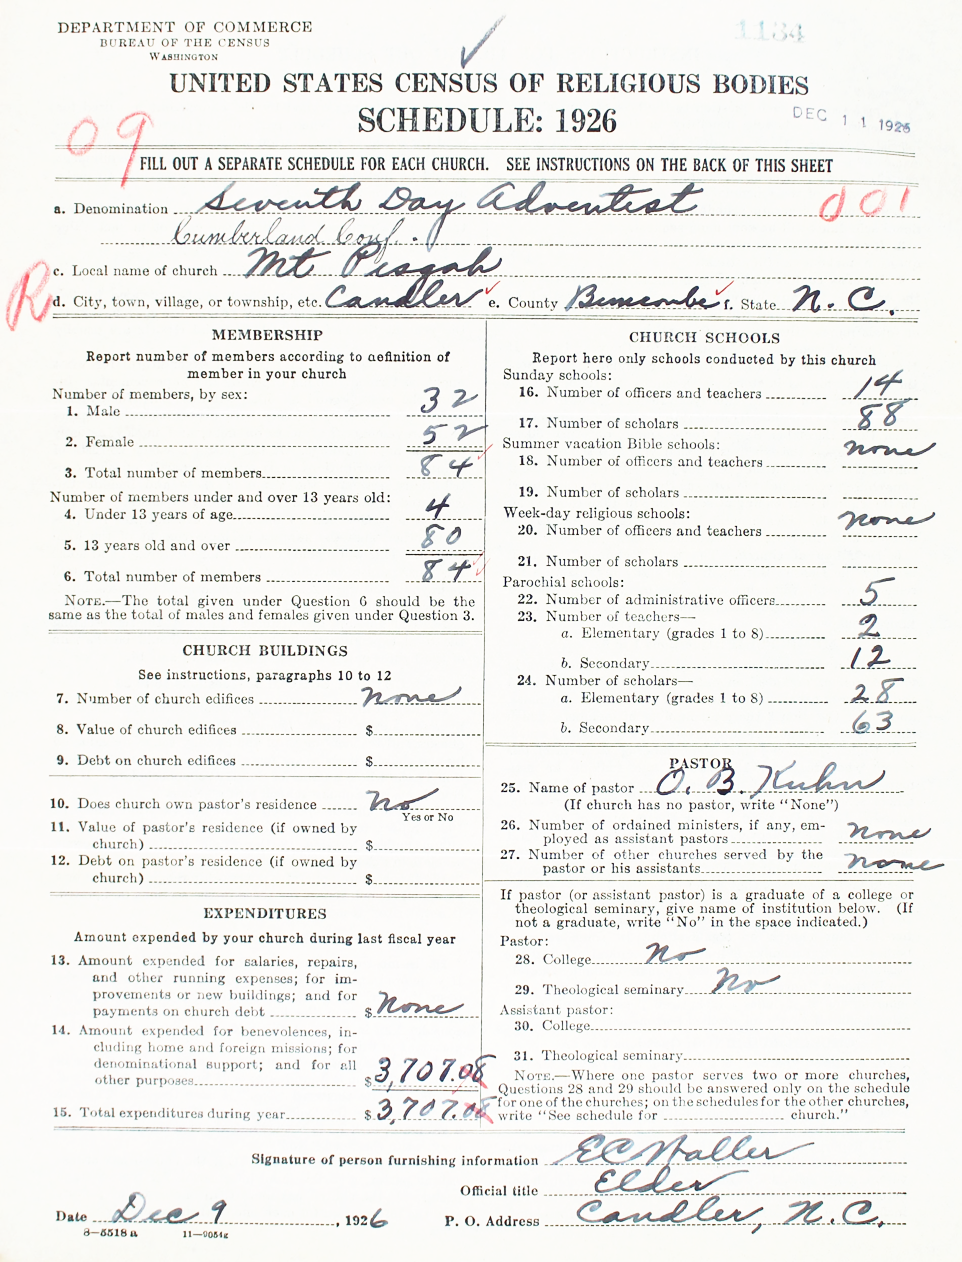 A schedule from the 1926 Census